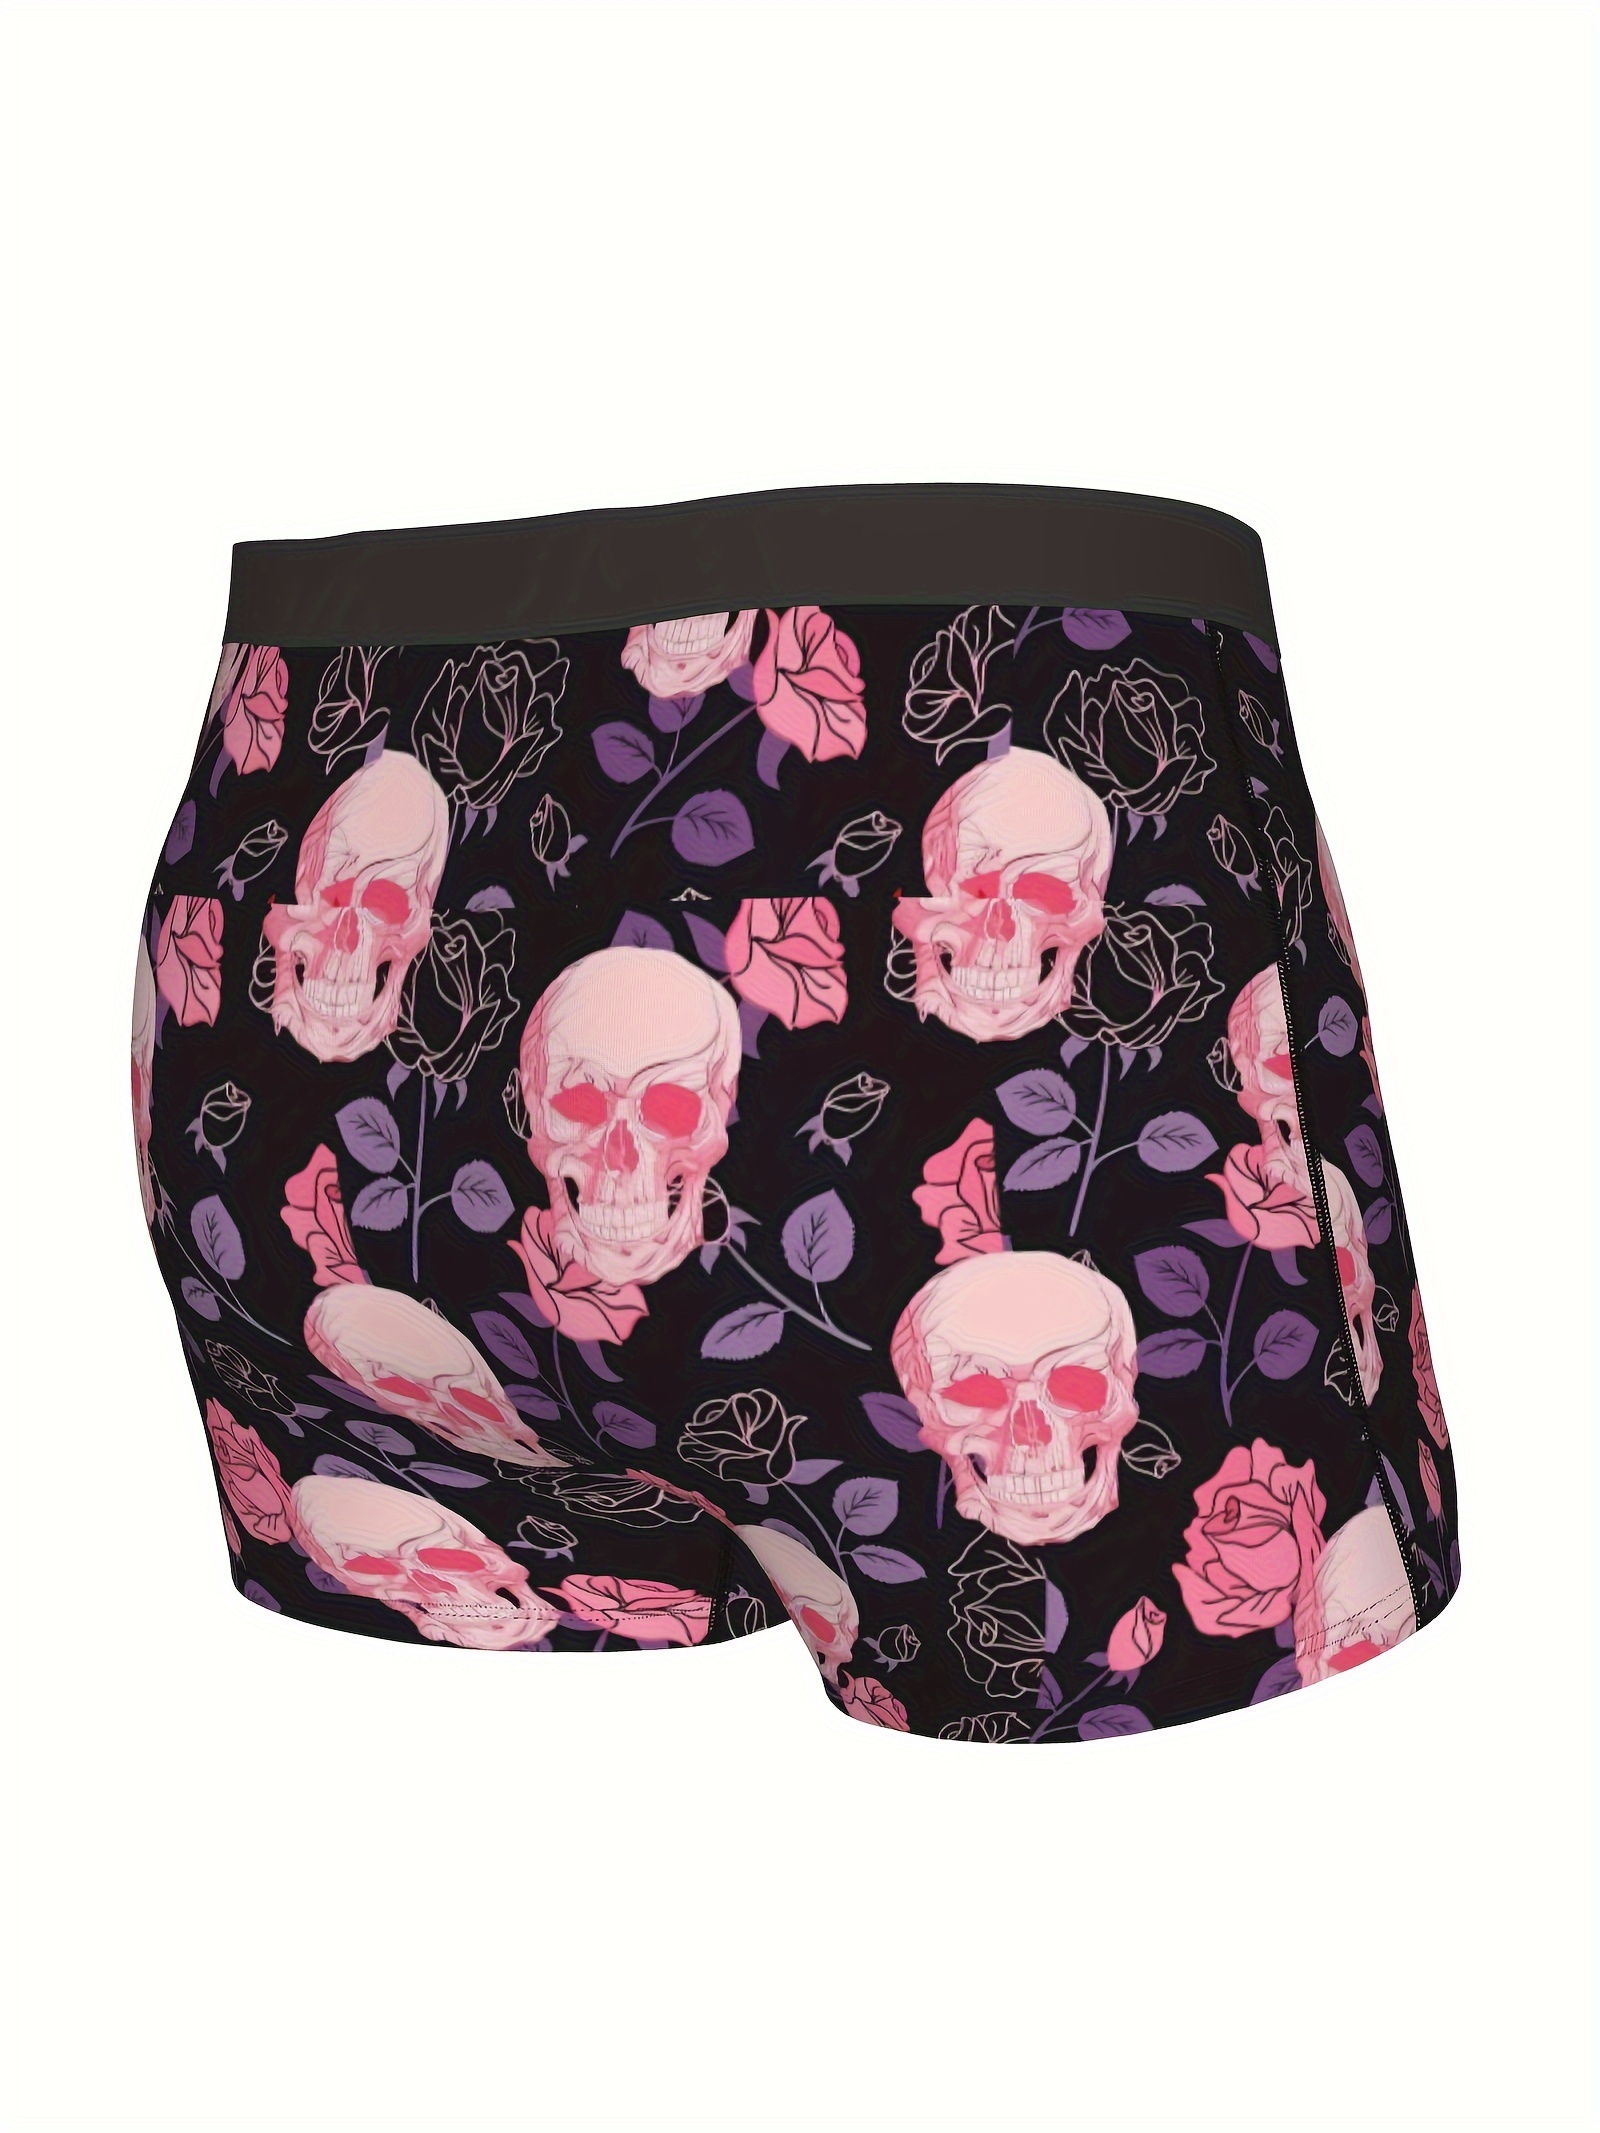 mens halloween skull horror pattern fashion novelty boxer briefs shorts sexy breathable comfy stretchy boxer trunks mens underwear details 2